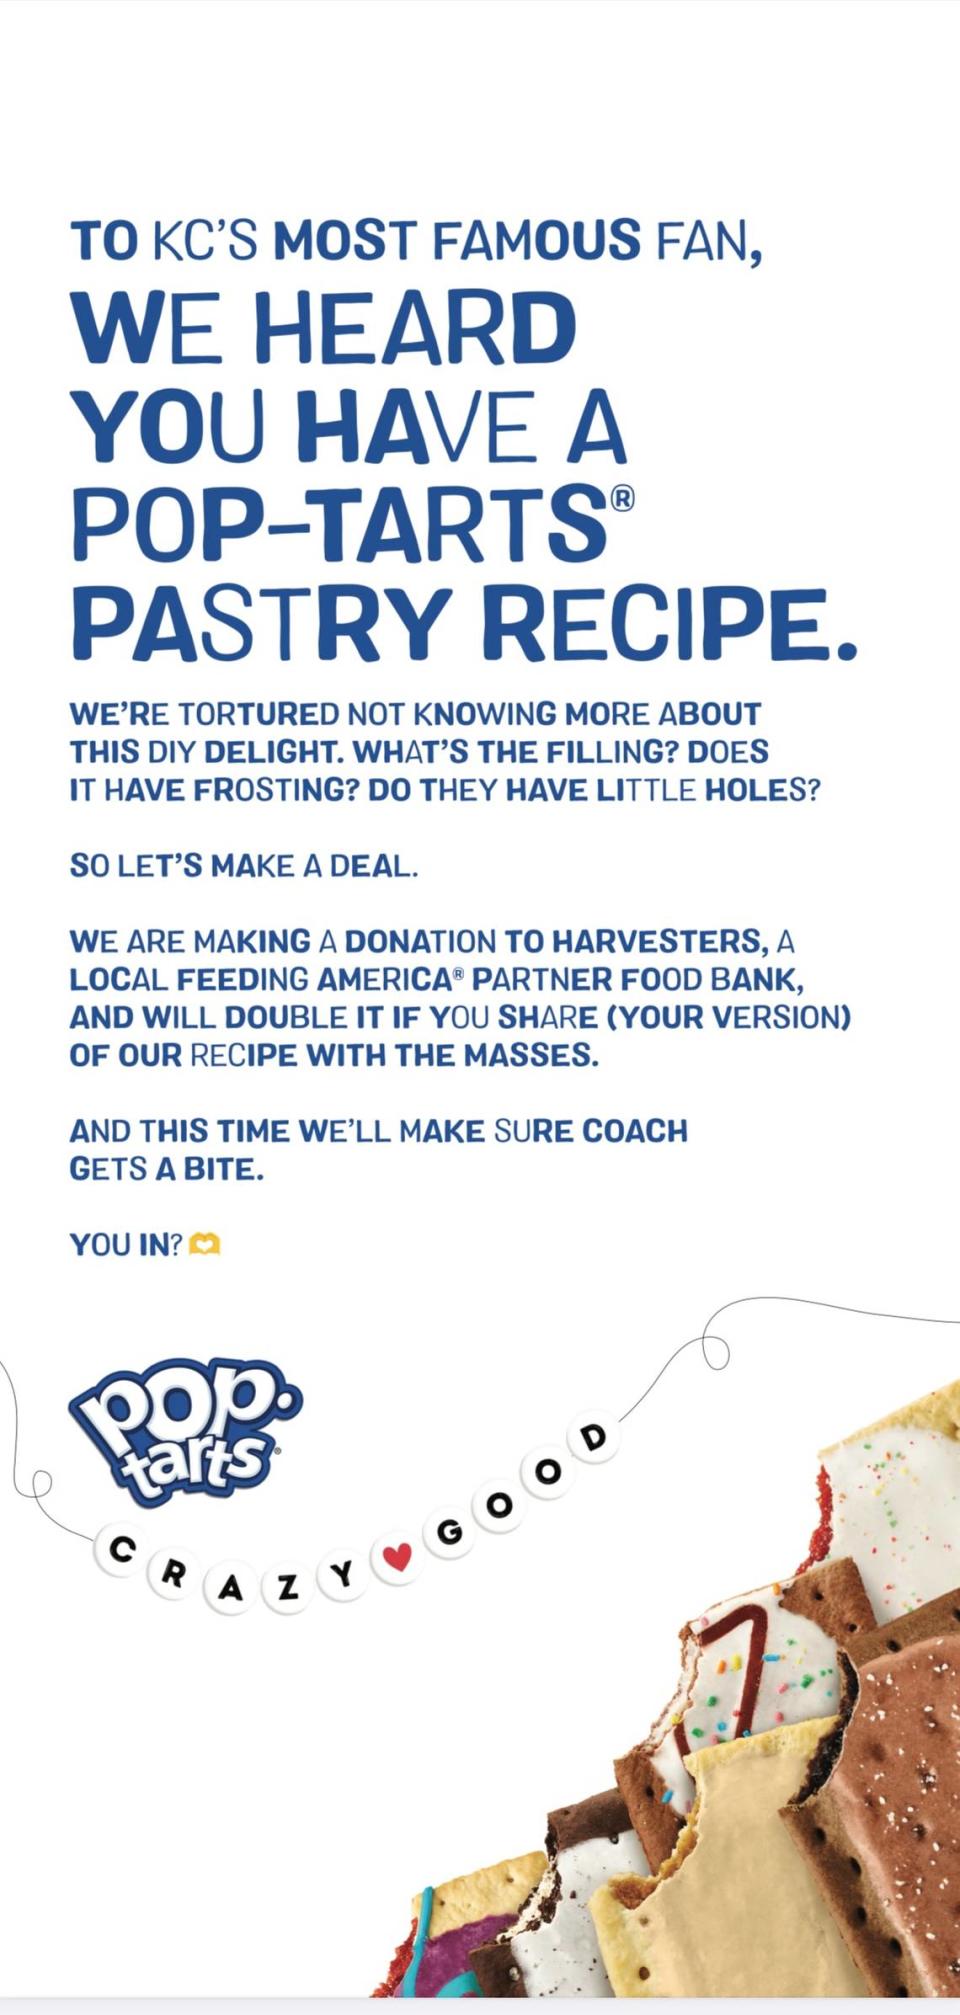 Pop-Tarts placed a plea to Taylor Swift in The Kansas City Star on Friday.